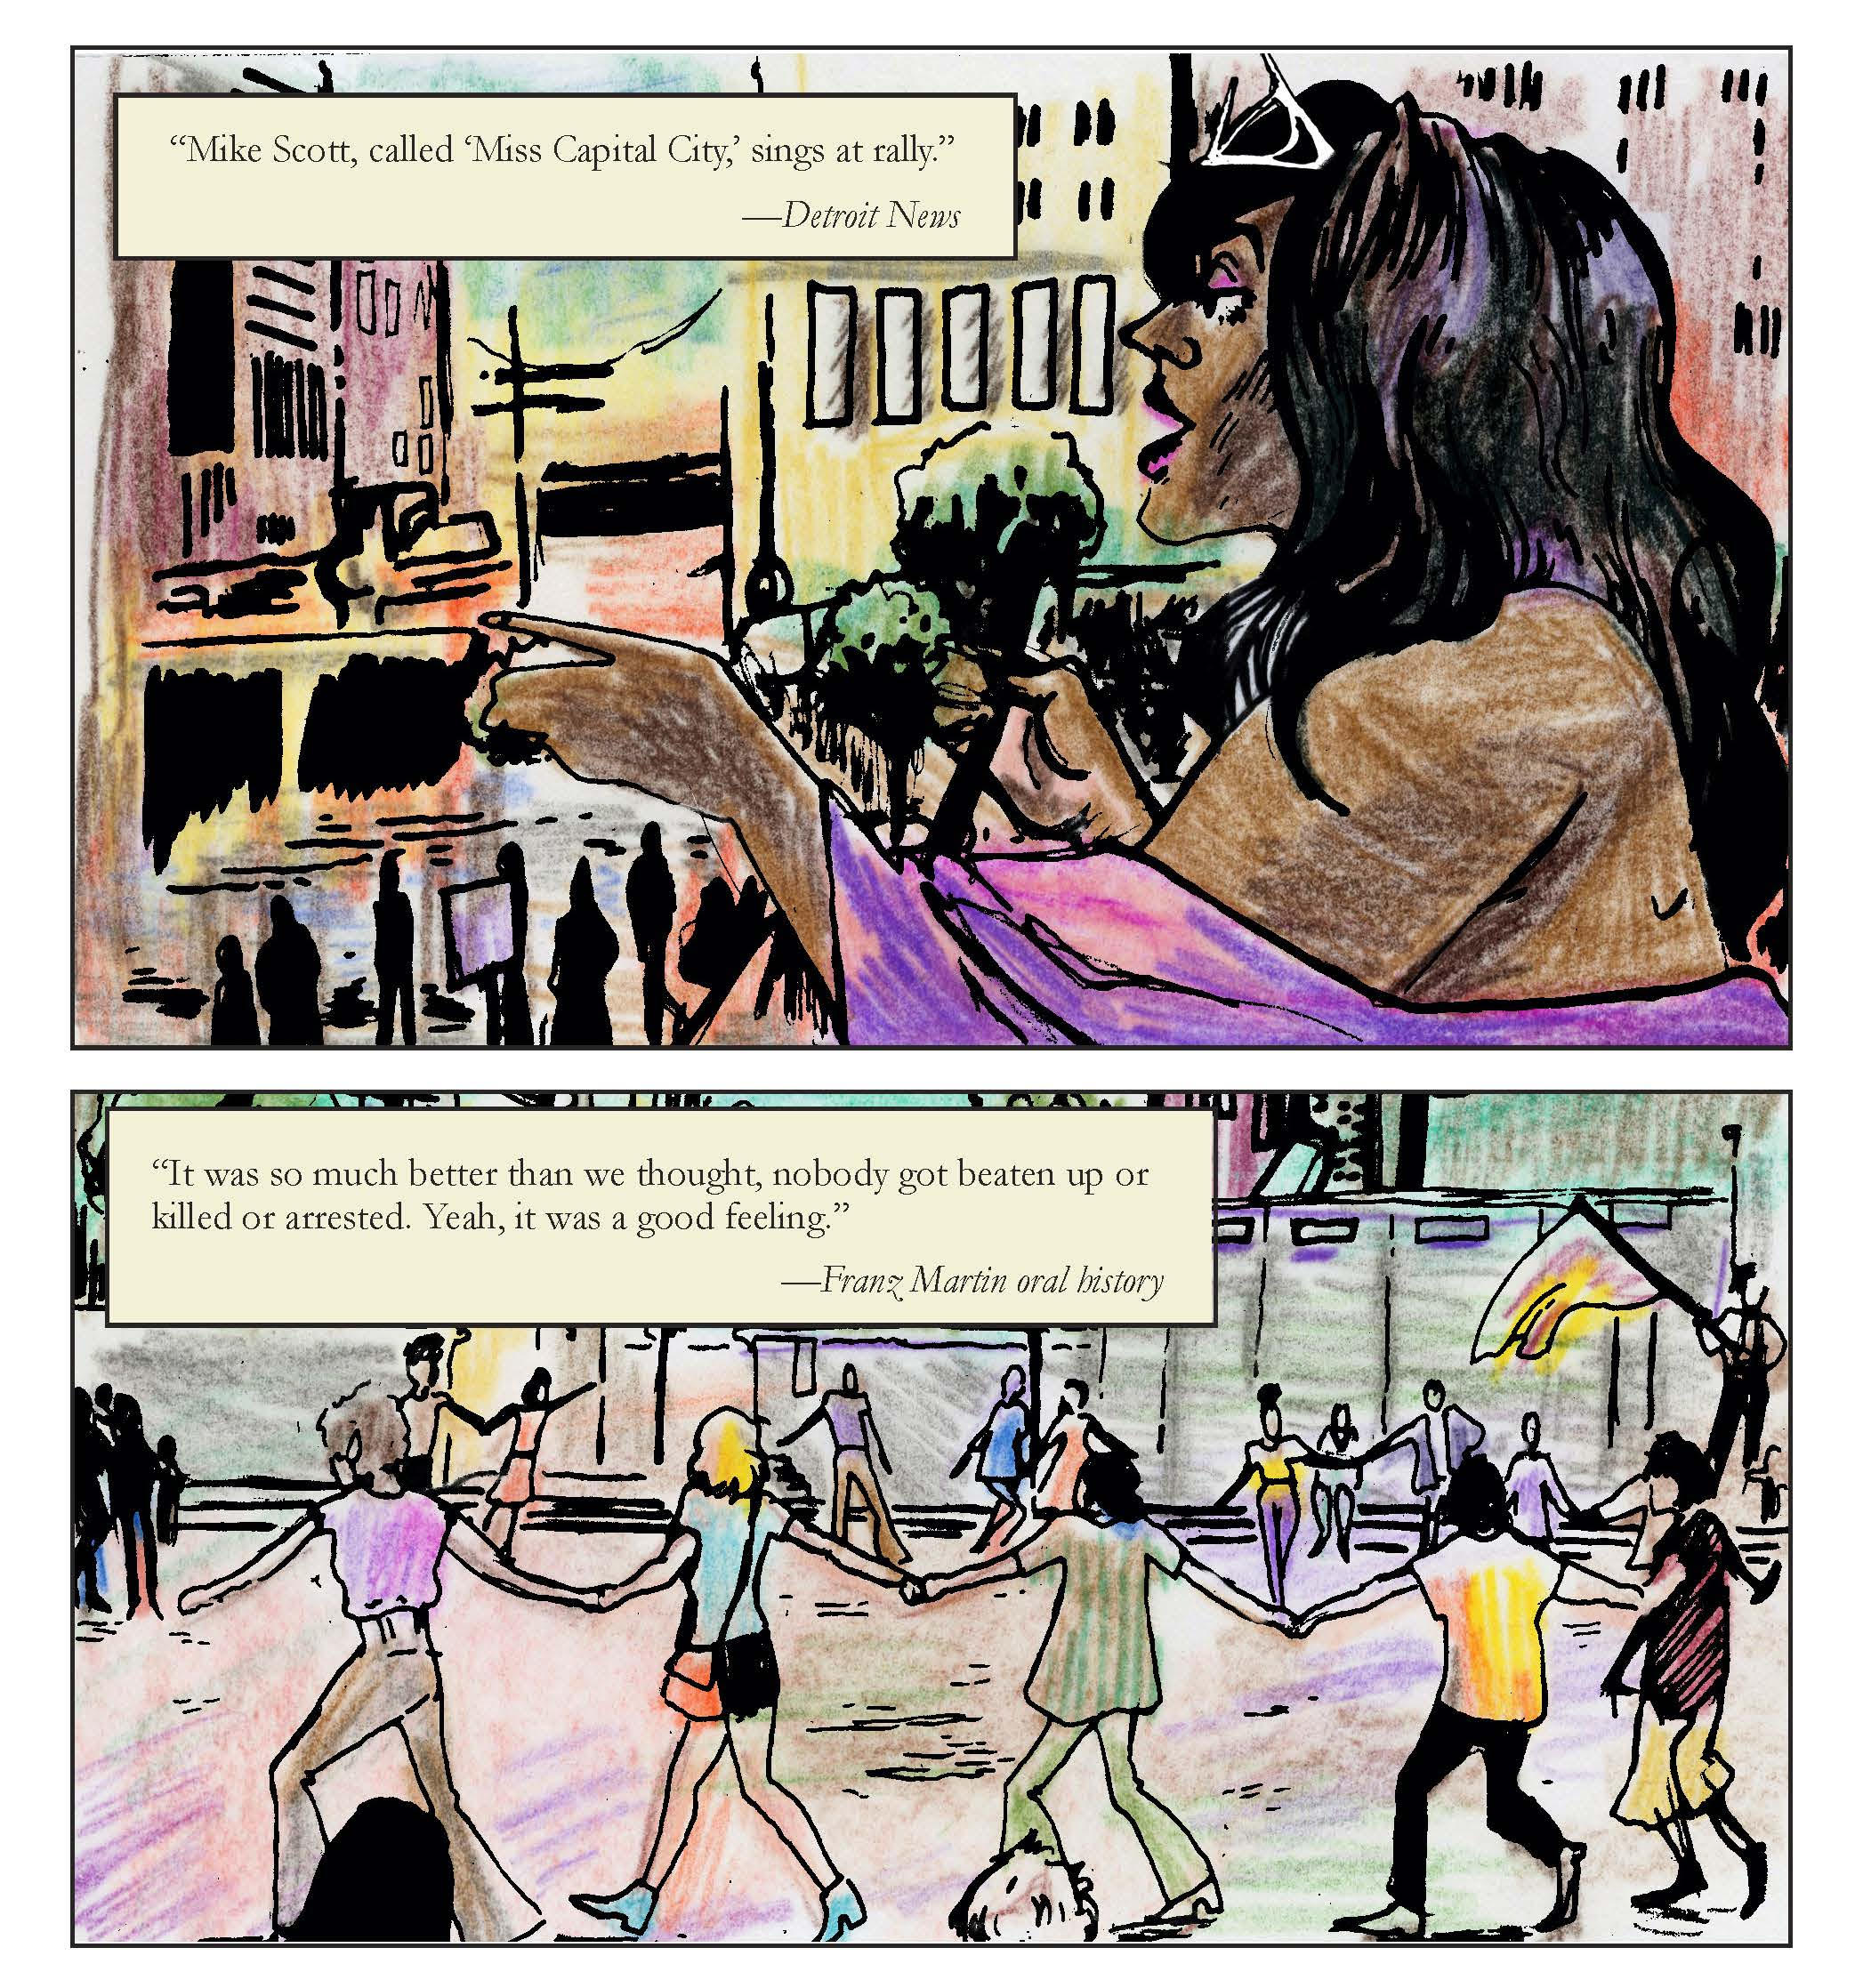 A page from Come Out! In Detroit with 2 panels. The first depicts a black woman with flowing hair and a microphone in a public space. The text reads “Mike Scott, called ‘Miss Capital City,’ sings at rally” (Detroit News). The second shows a variety of people with linked hands. The text reads “It was so much better than we thought, nobody got beaten up or killed or arrested. Yeah, it was a good feeling” (Franz Martin oral history).